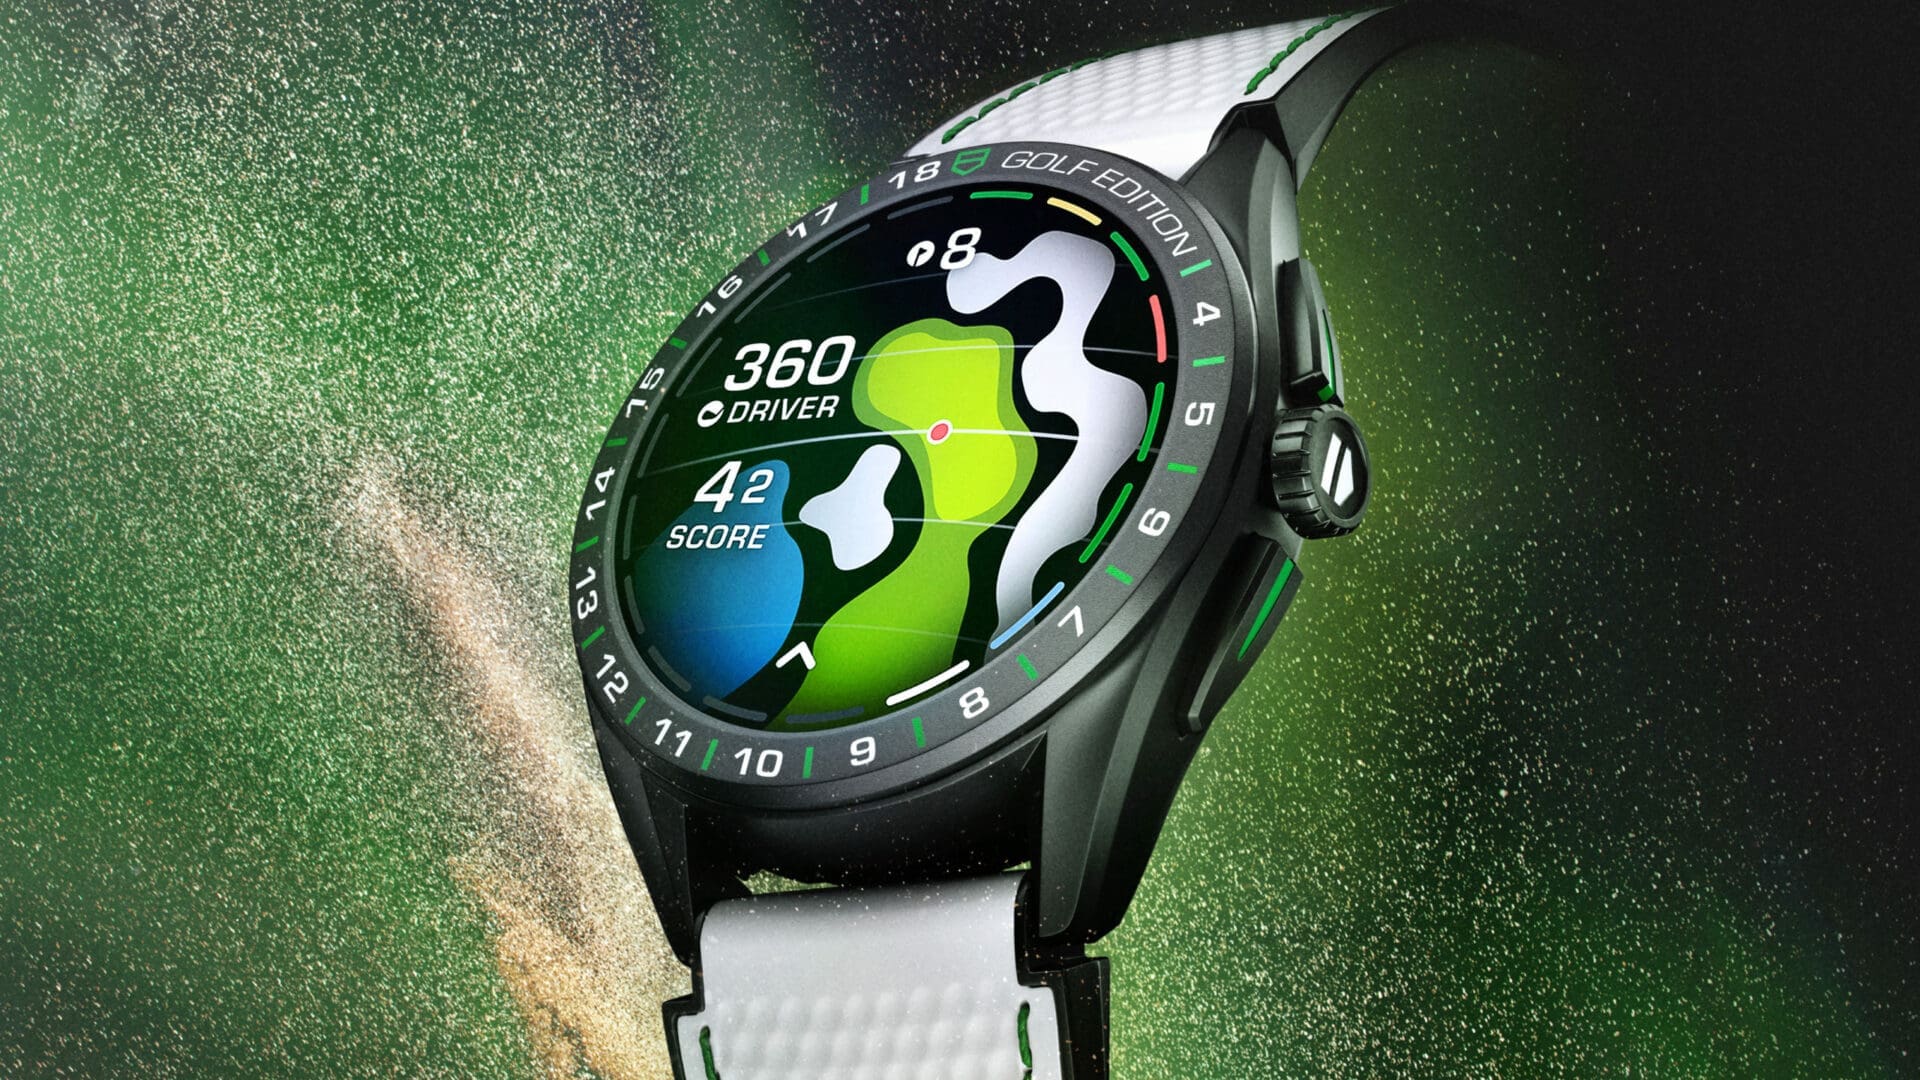 INTRODUCING: TAG Heuer’s Connected Calibre E4 Golf Edition will put you on the fairway to heaven